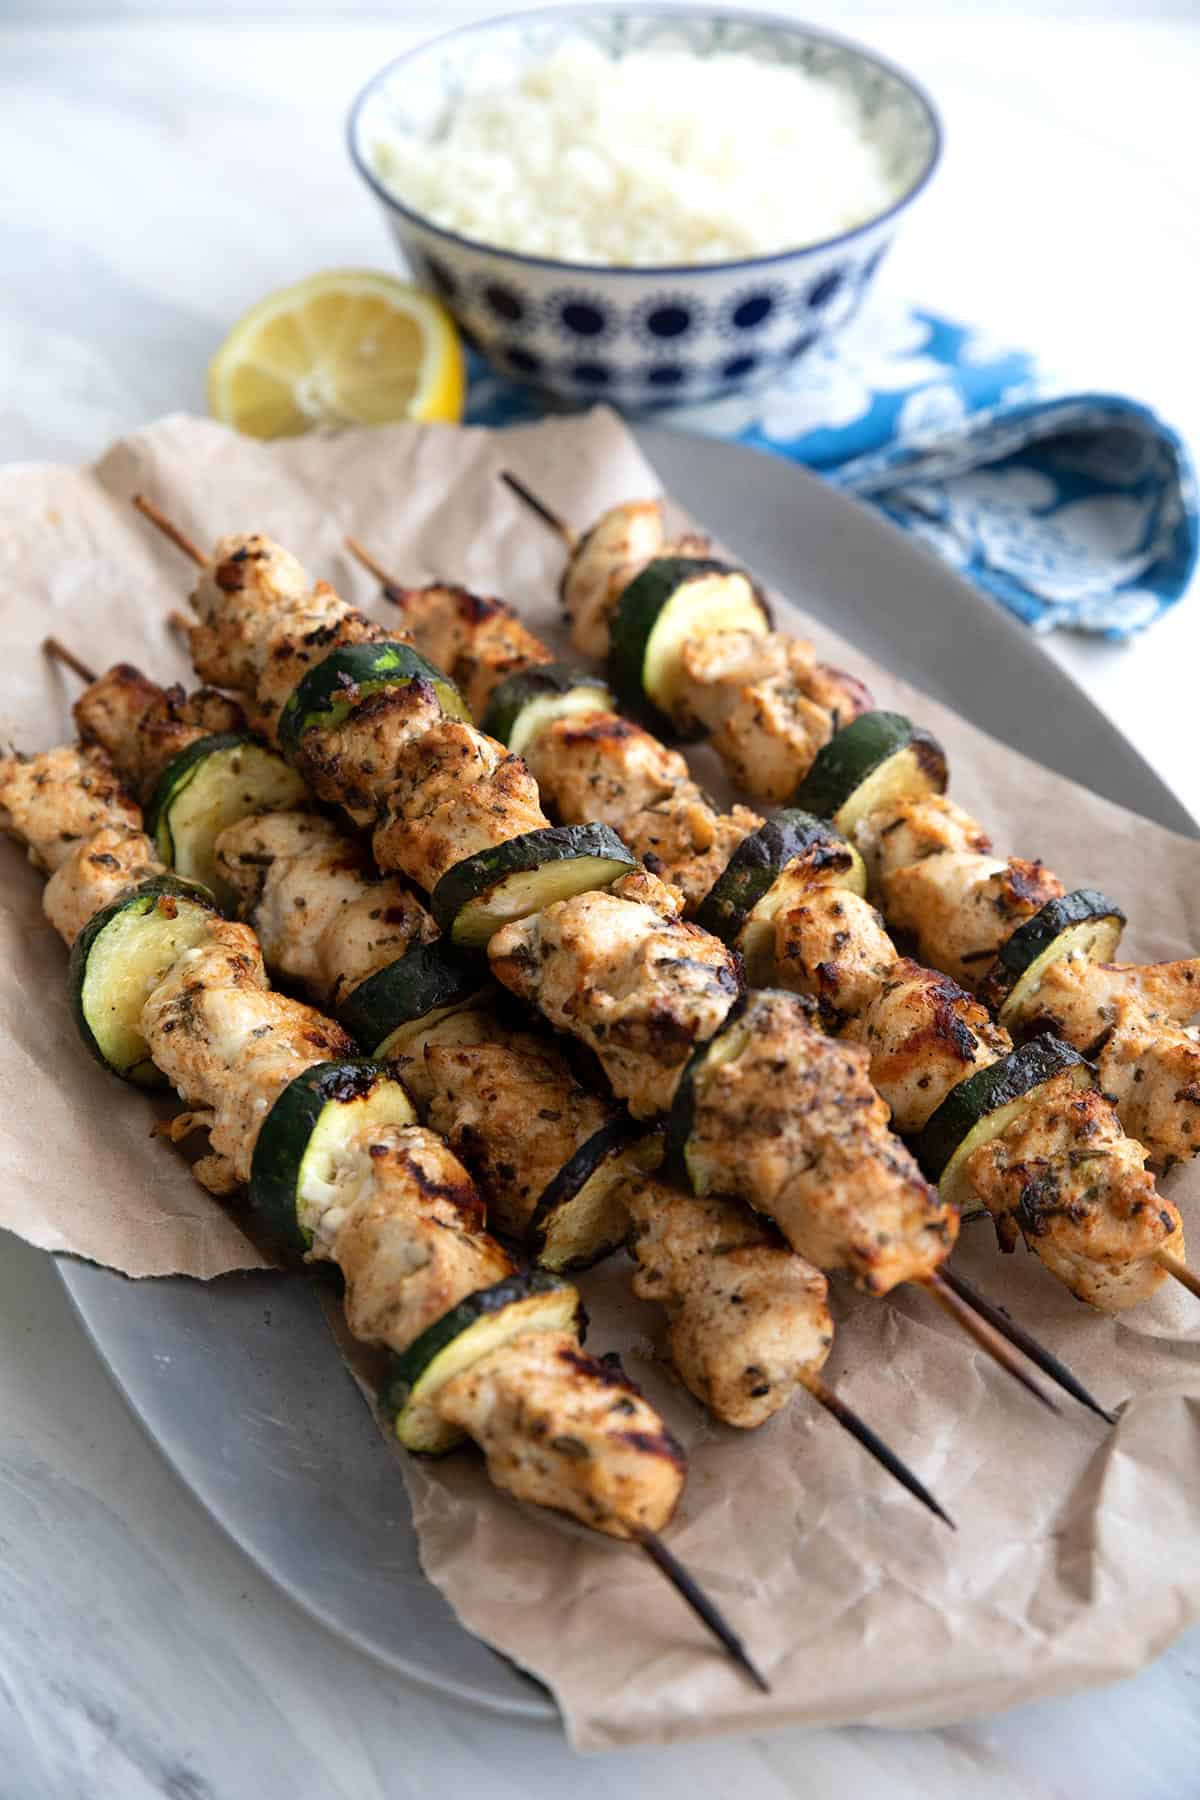 Chicken Souvlaki skewers on a paper lined tray with cauliflower rice in the background.